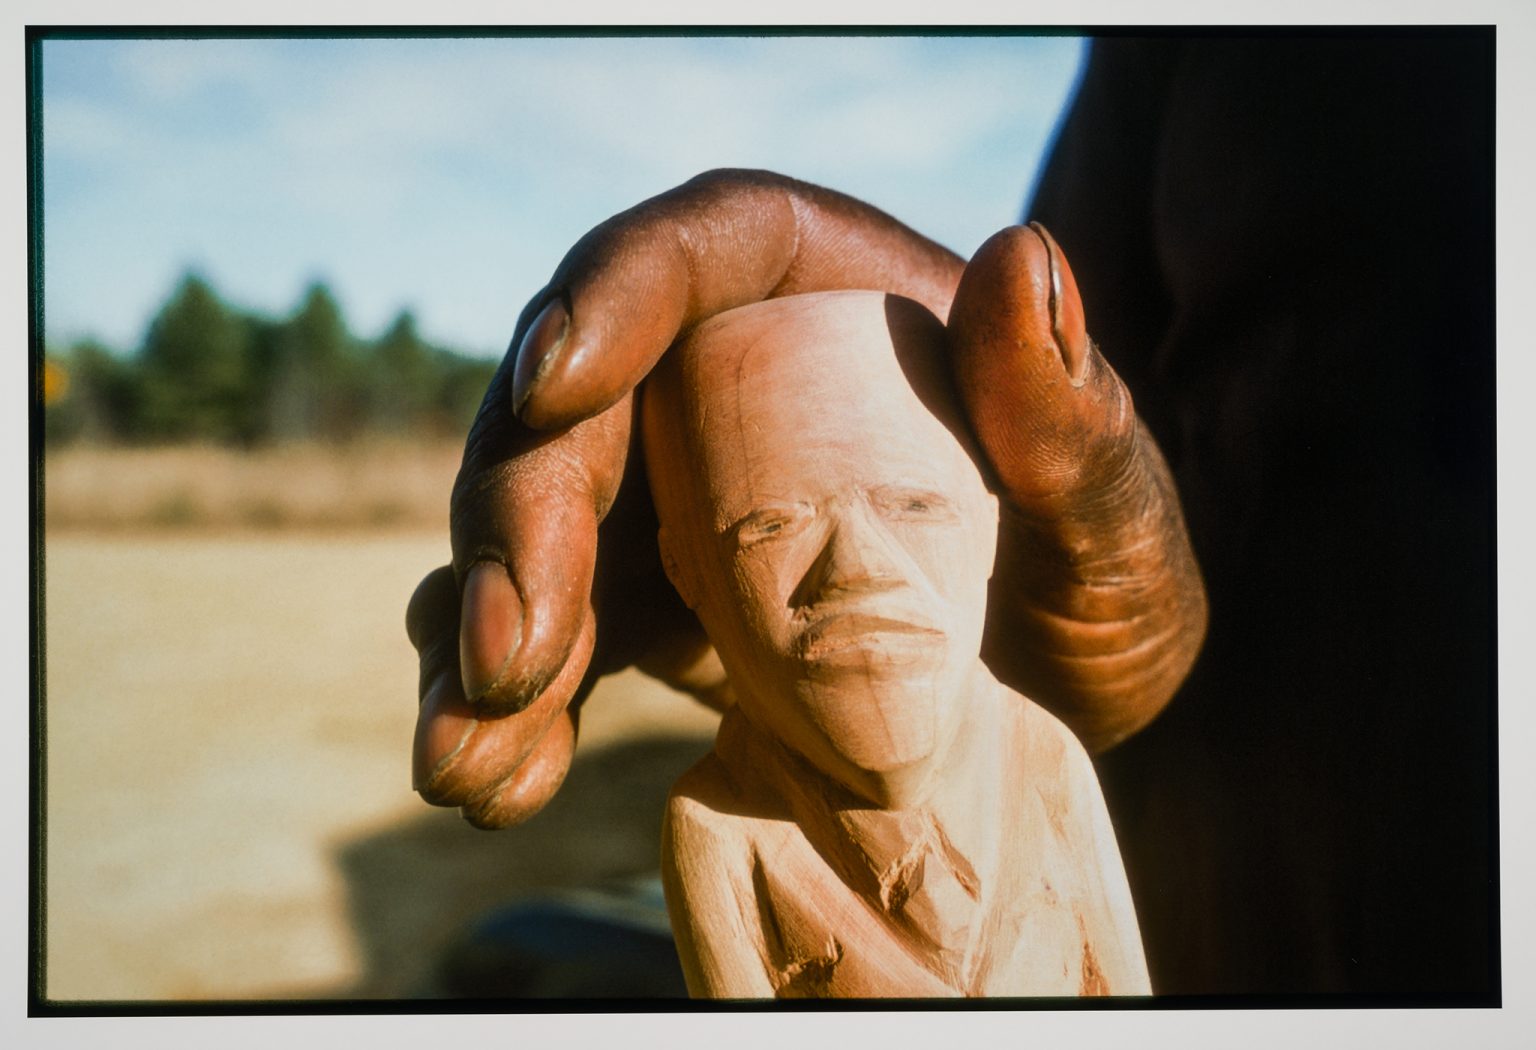 Untitled (Head of Cedar Walking Cane Carved by Luster Willis, Crystal Springs, MS),’ a 1976 photograph by William Ferris, was donated to the University of Mississippi Museum by Ferris.